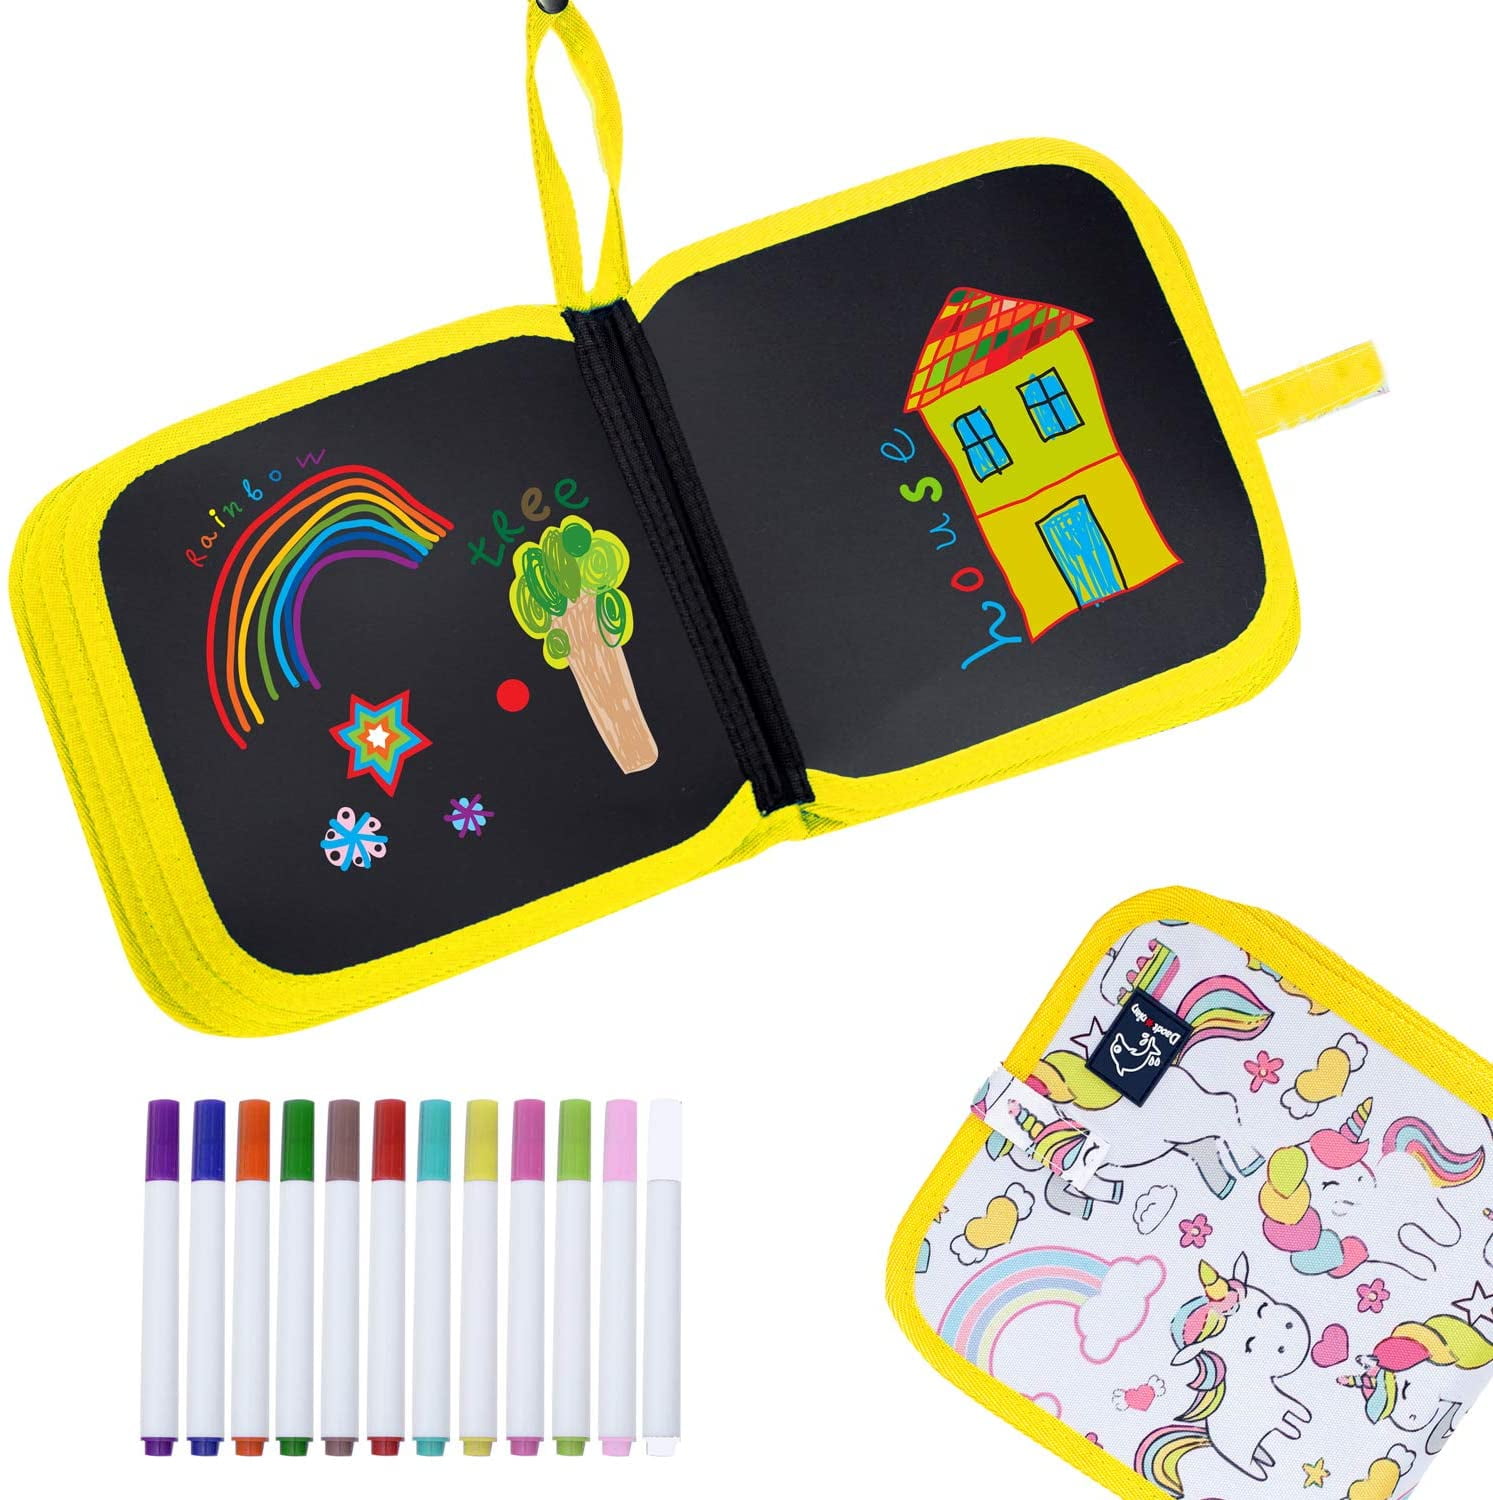 Erasable Doodle Book,Double-Sided Kids' Drawing Writing Boards with 12 Colored Erasable Pens,Portable Kids' Writing Drawing Board Toy for Boys Girls Gift Age 2 3 4 5 6 7 8 Year Old Bear